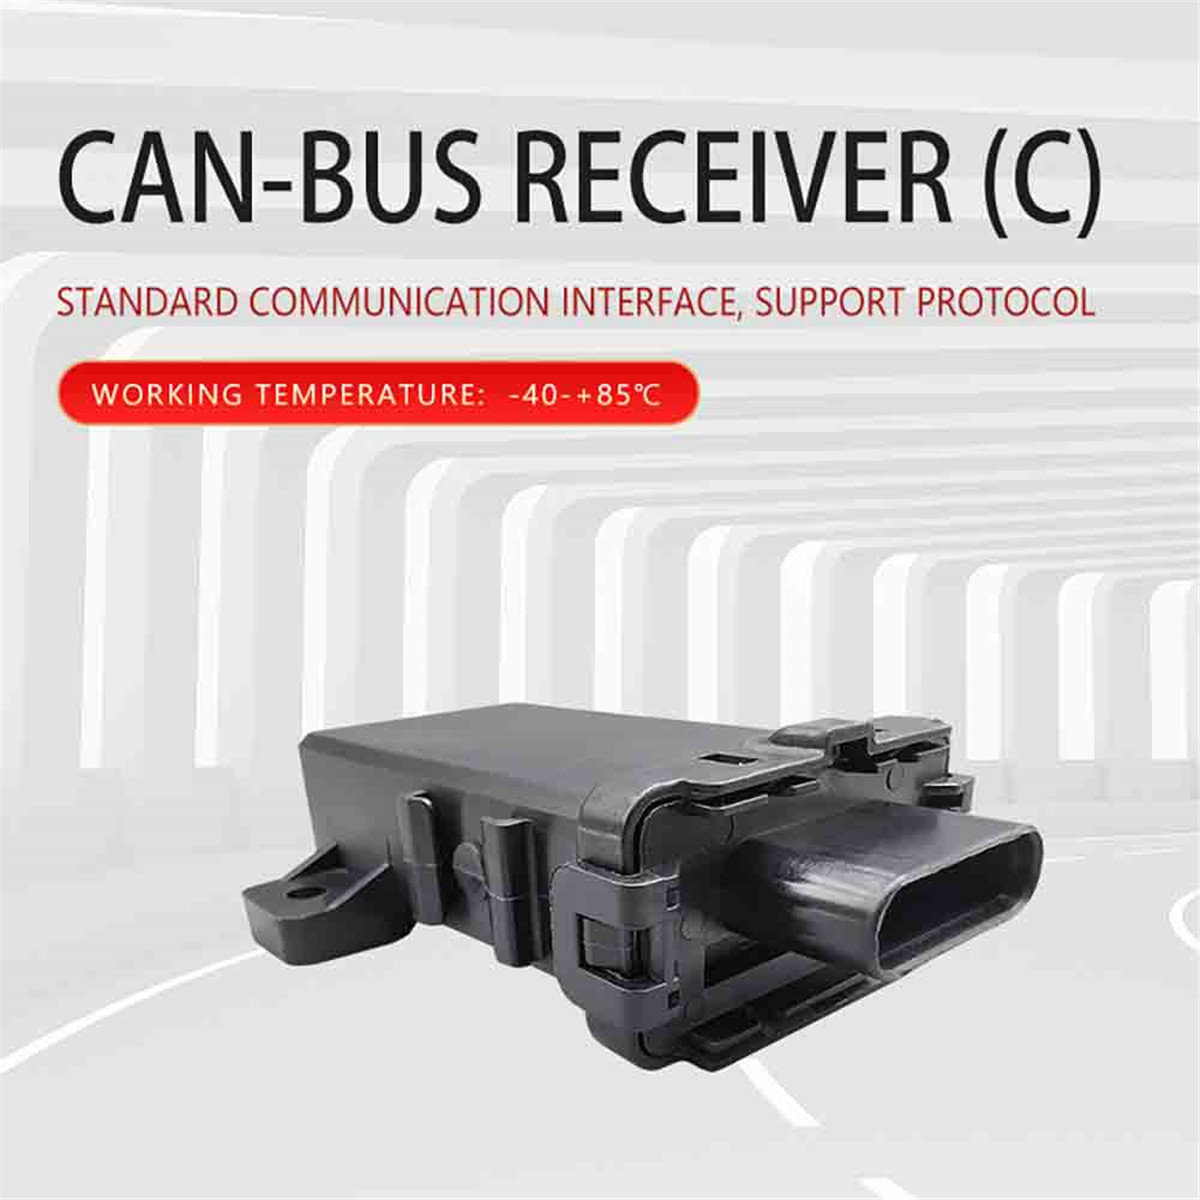 I-CAN-Bus receiver01 (7)